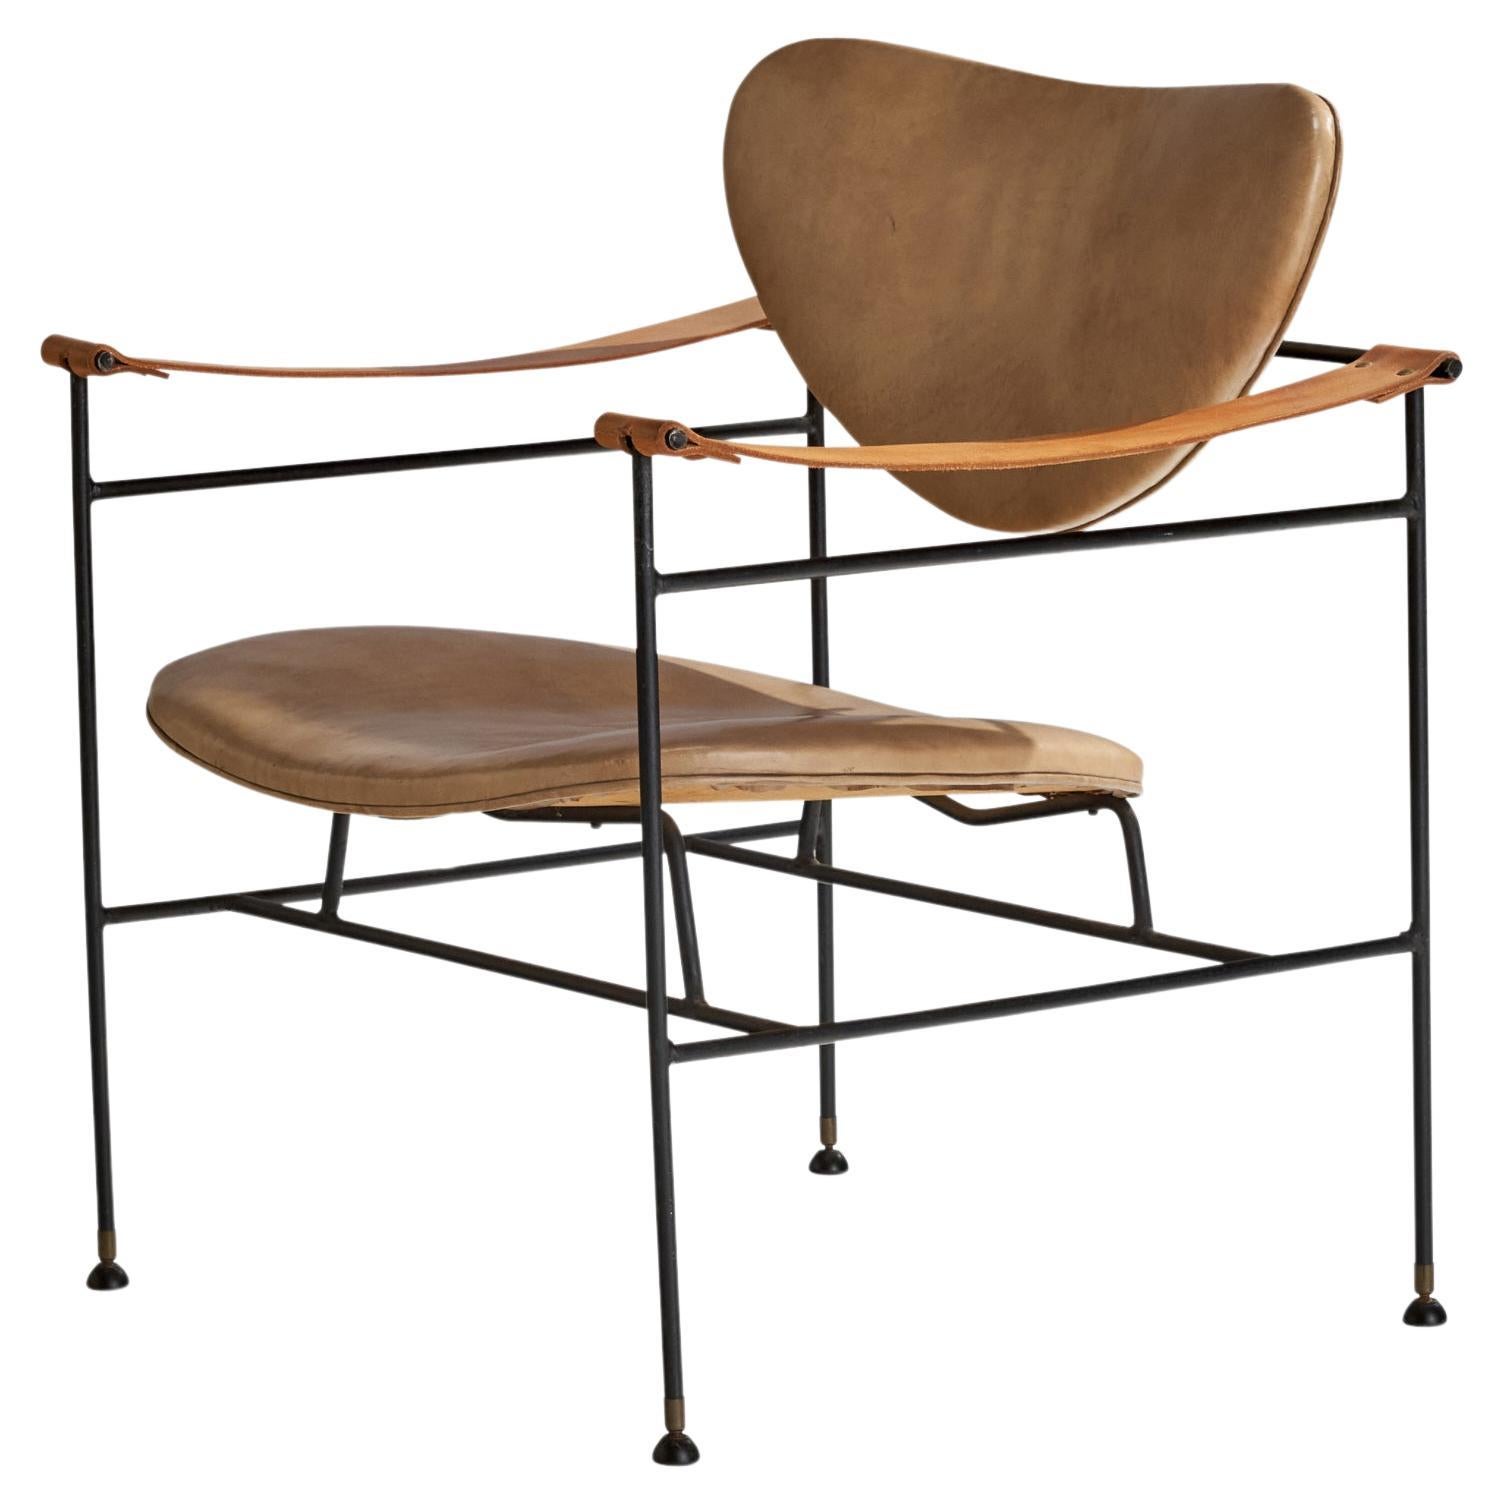 Reilly-Wolff & Associates Attribution, Armchair, Metal, Leather, USA, 1951